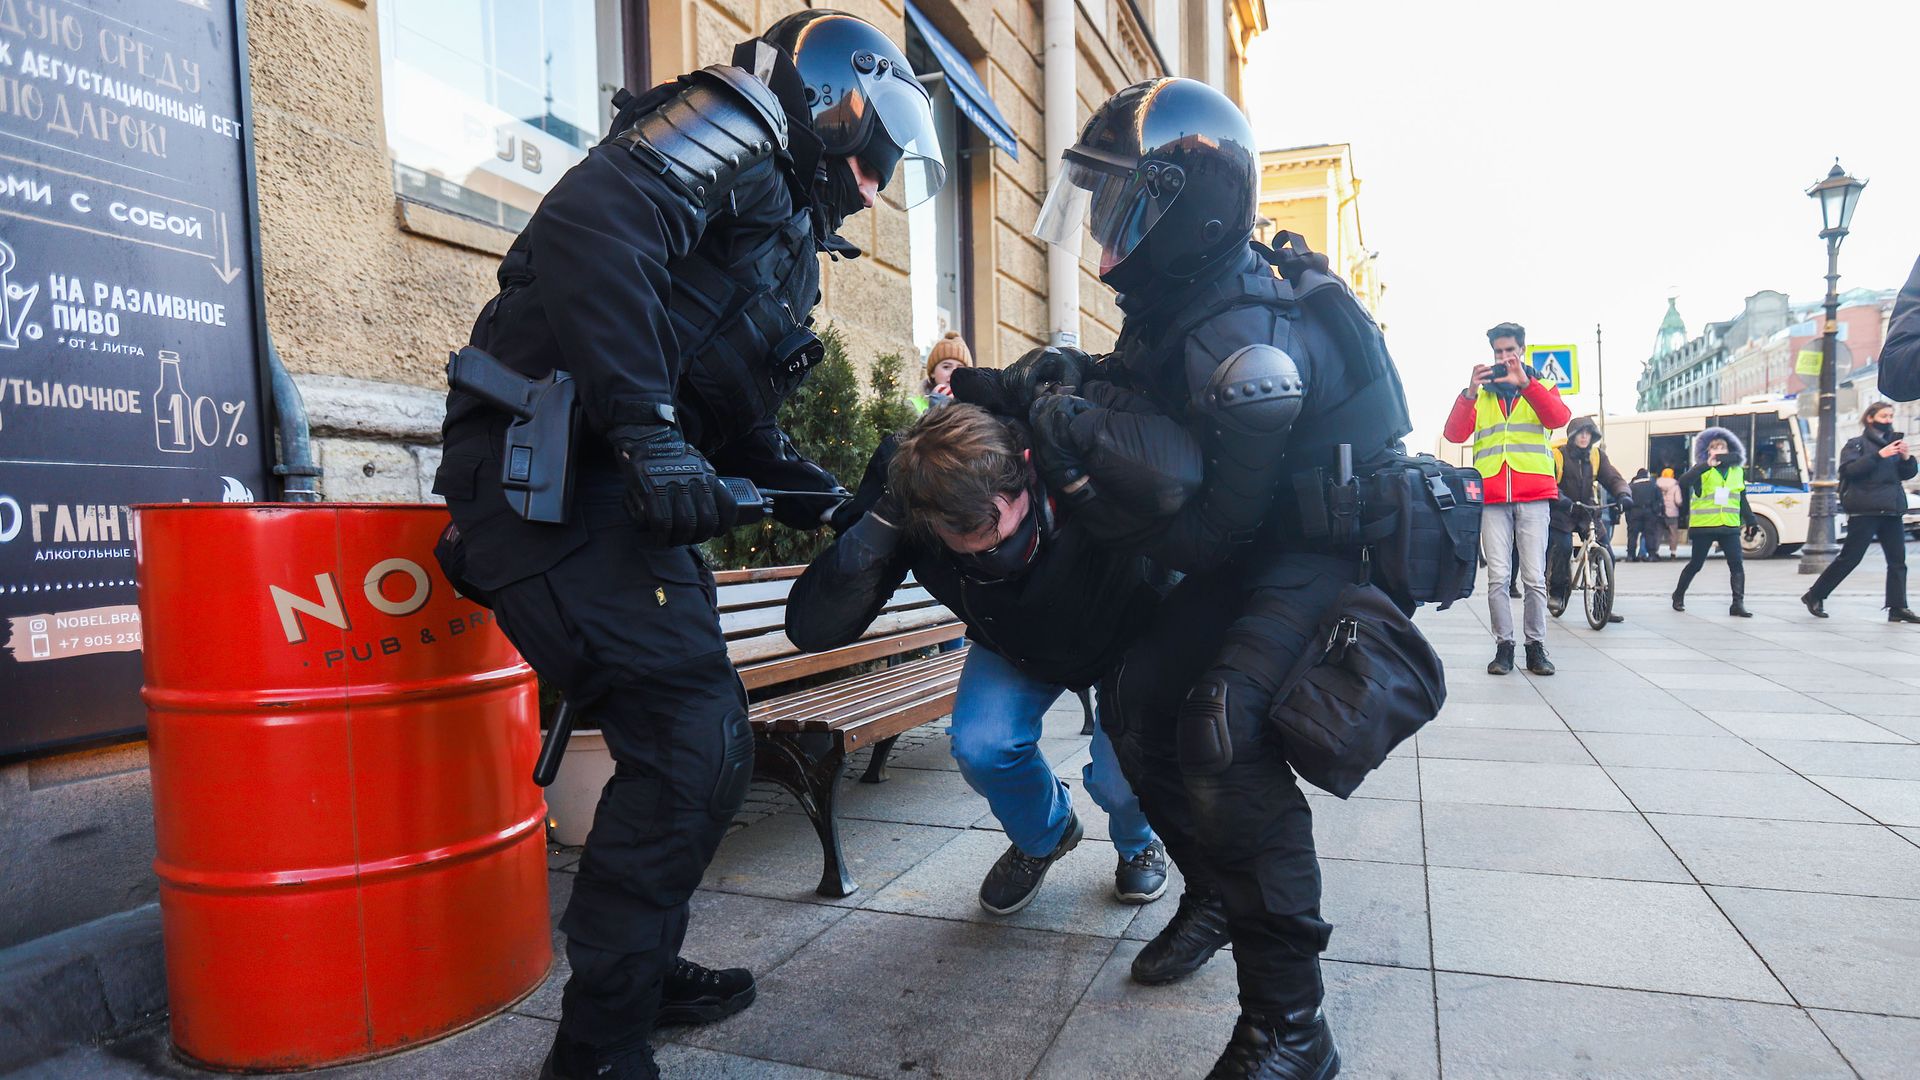 Police Officers detain a protestor during a demonstration against the Russian military operation in Ukraine.